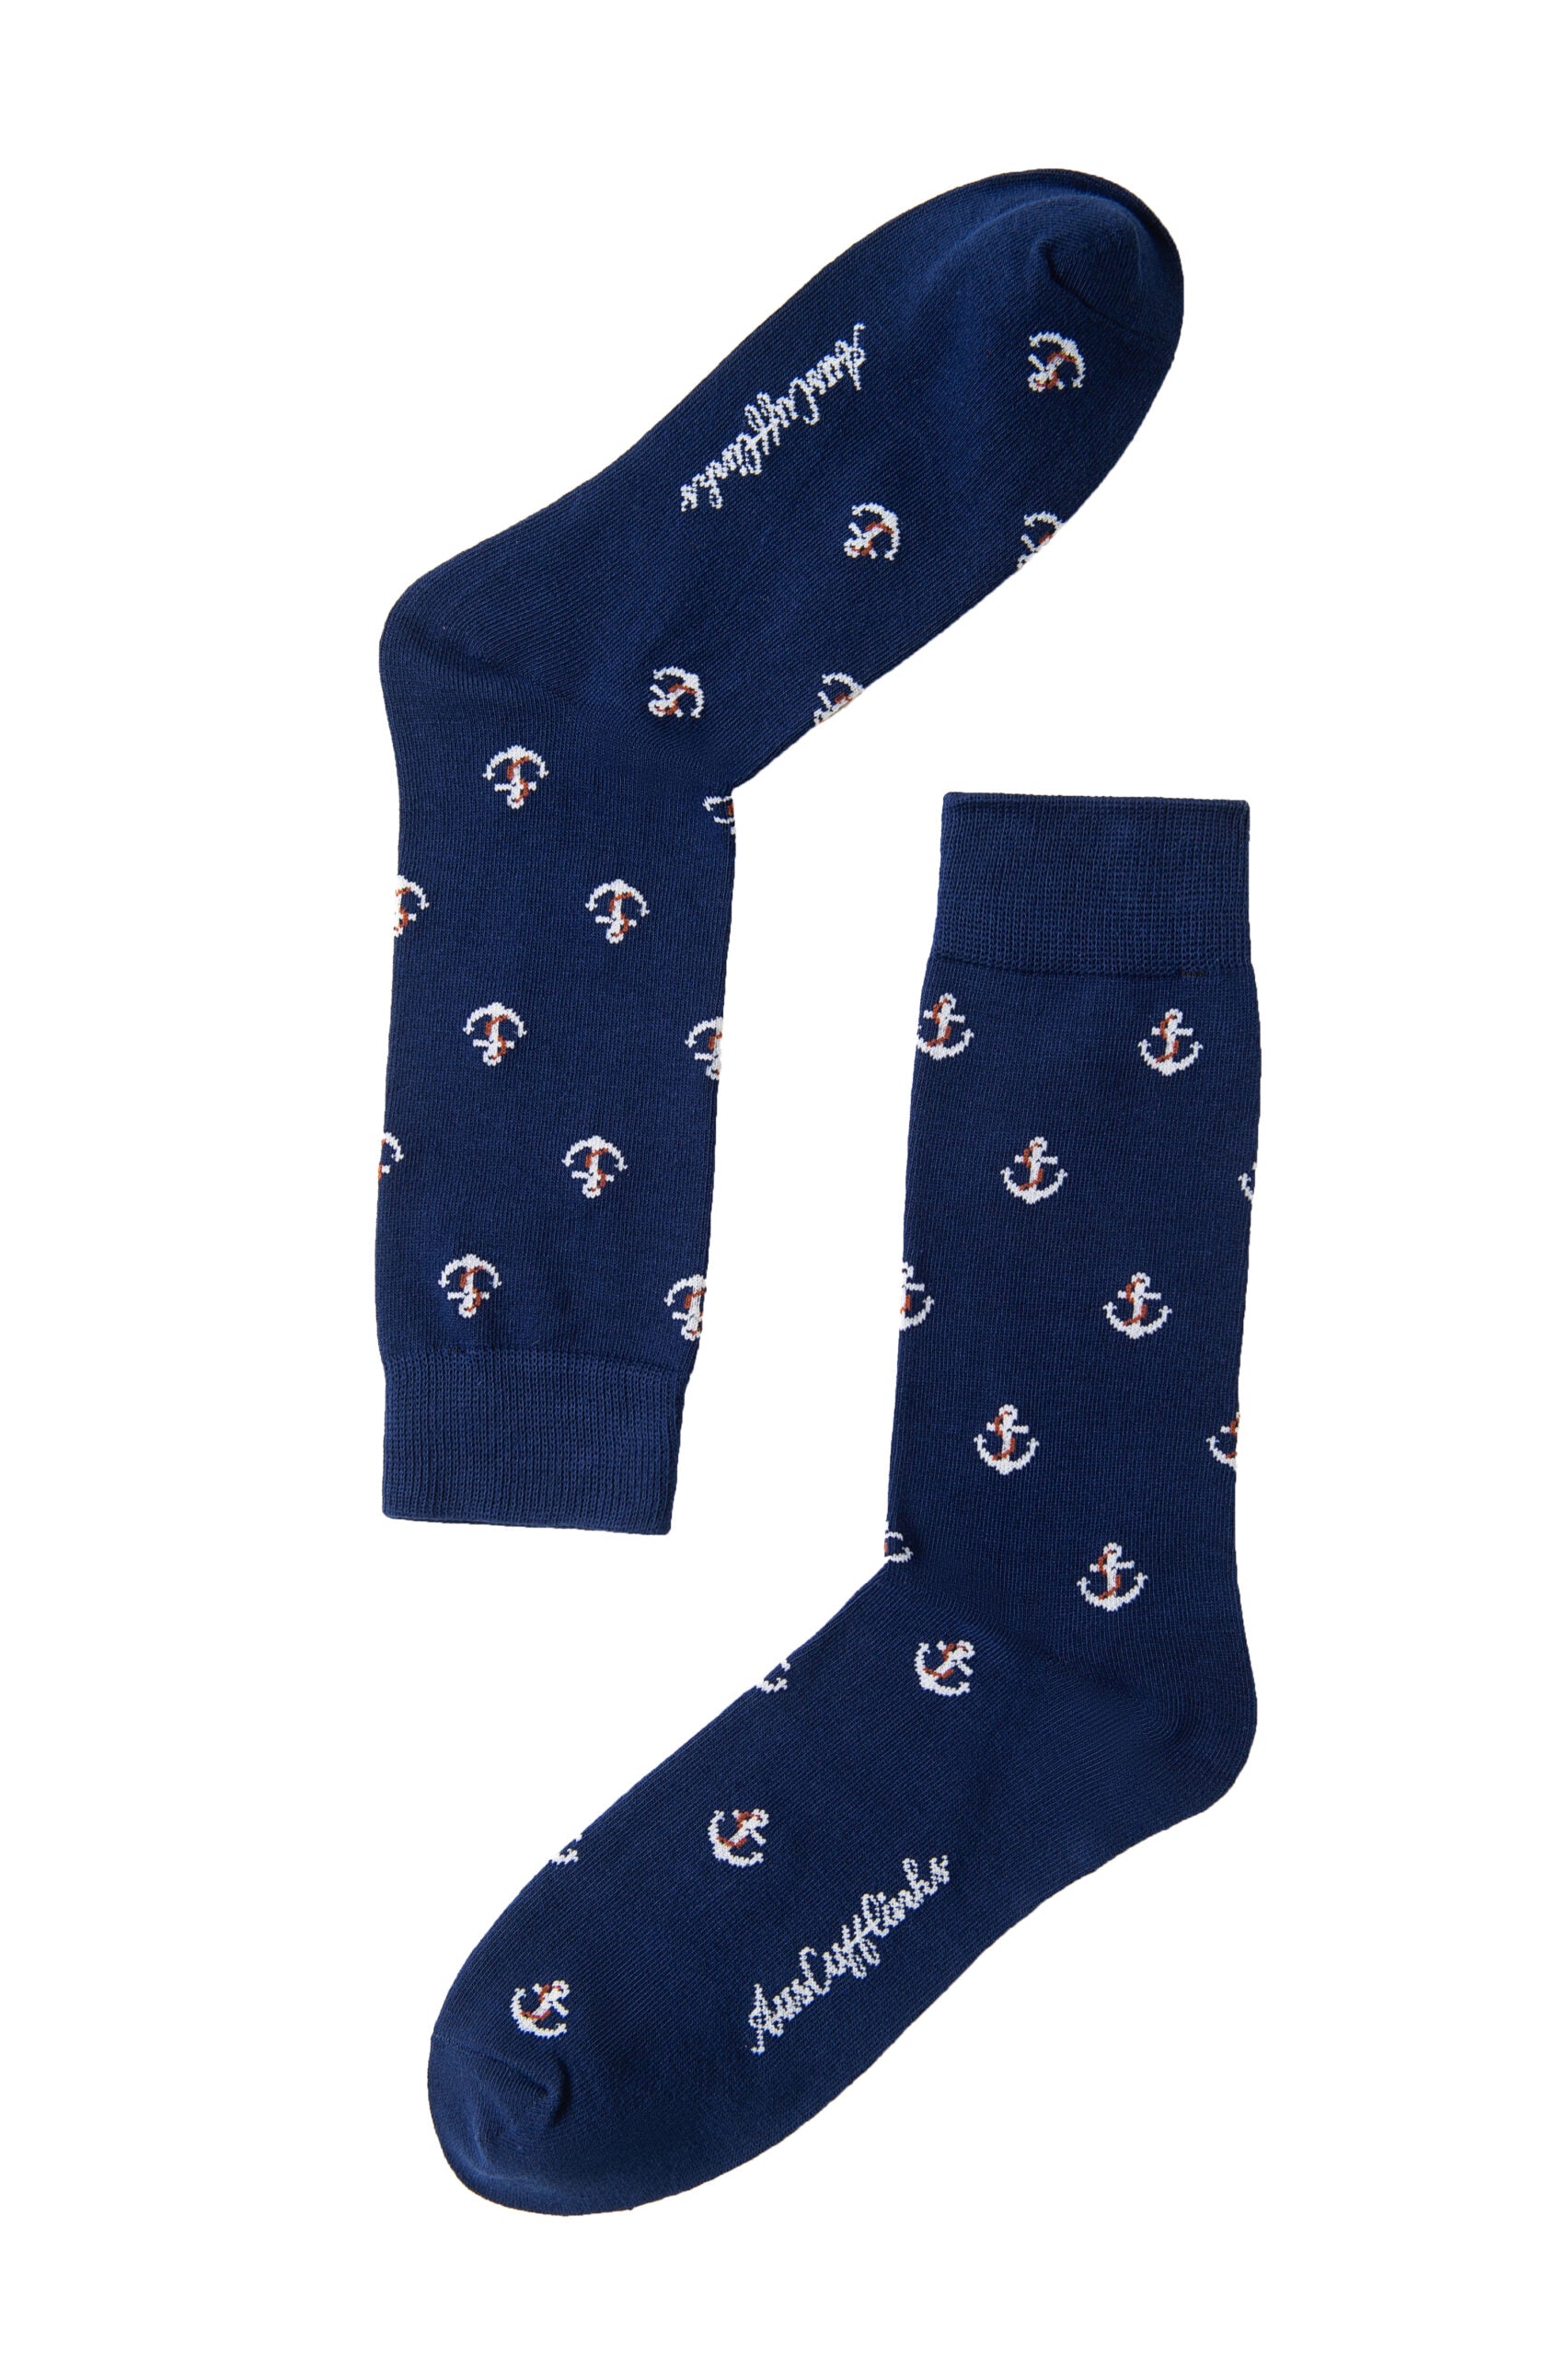 Navy Anchor Socks with anchors.